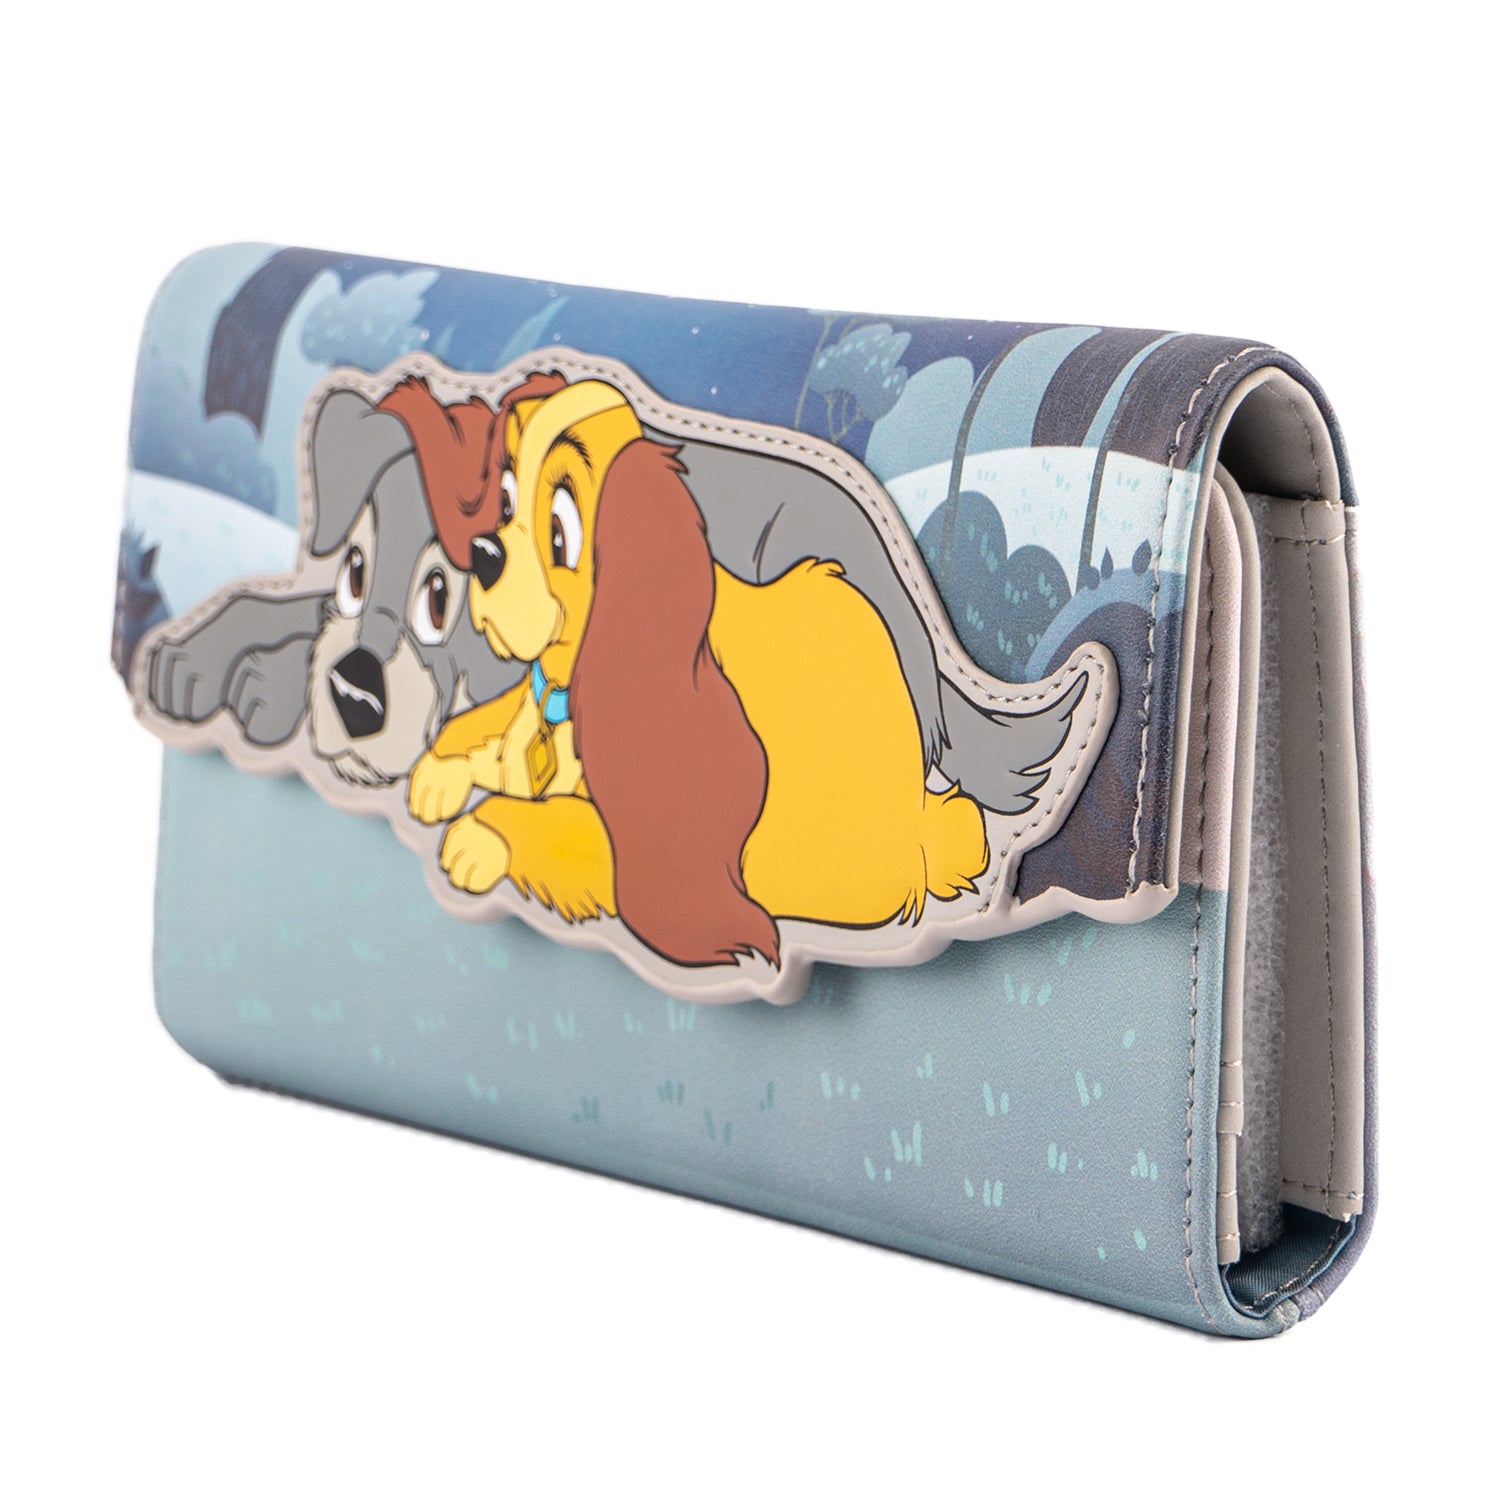 Disney | Lady and The Tramp Wet Cement Button Flap Wallet